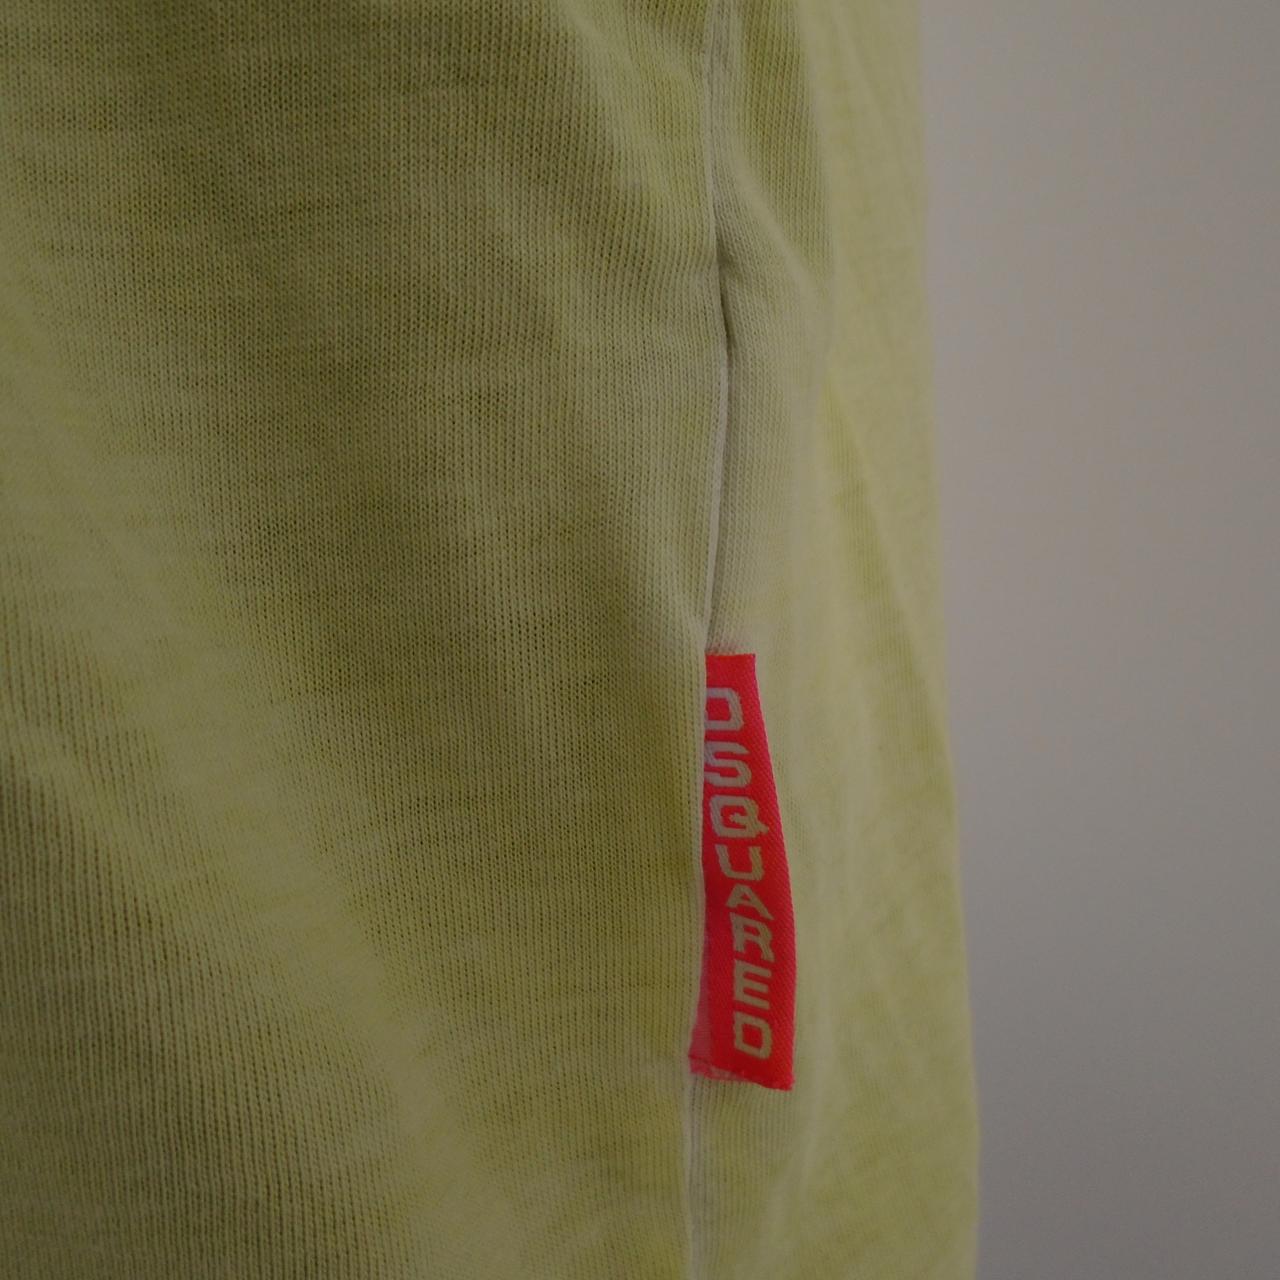 Men's T-Shirt Dsquared2. Yellow. XL. Used. Good